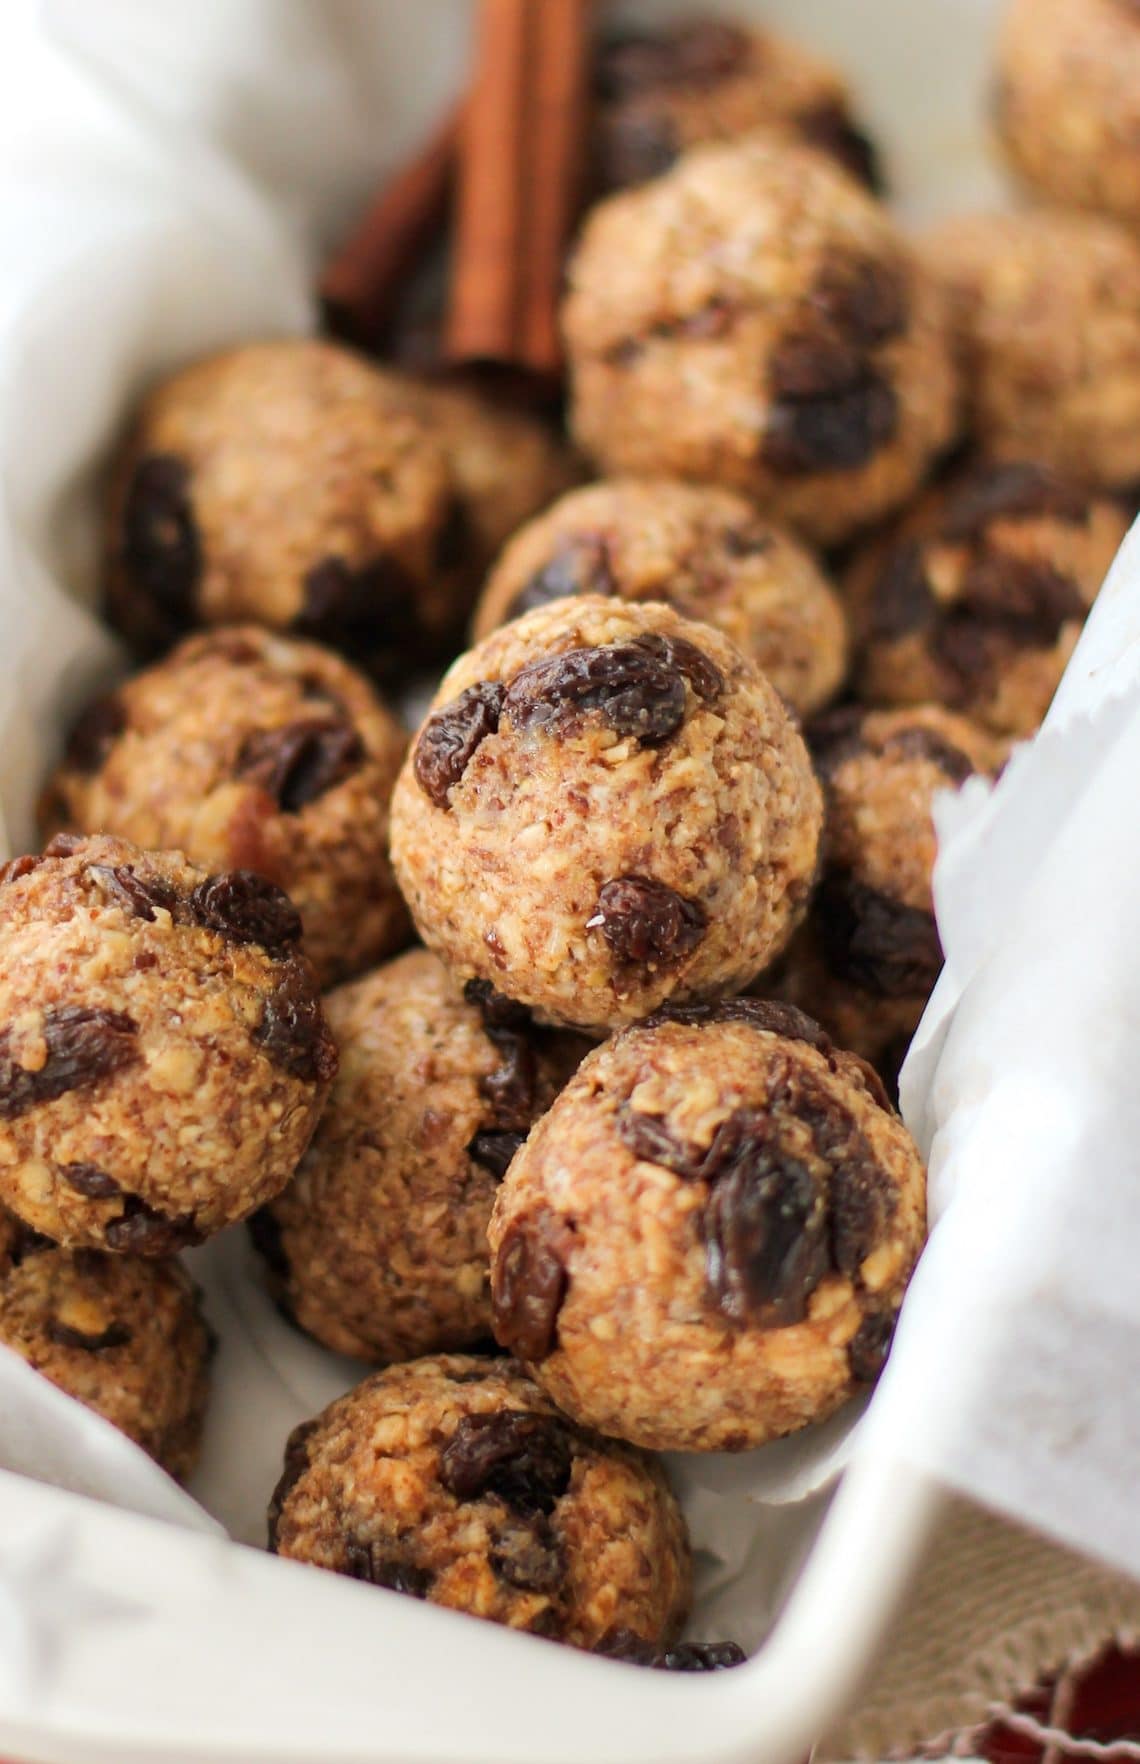 Healthy Oatmeal Raisin Cookie Energy Bites (refined sugar free, gluten free, dairy free, vegan) - Healthy Dessert Recipes at Desserts with Benefits